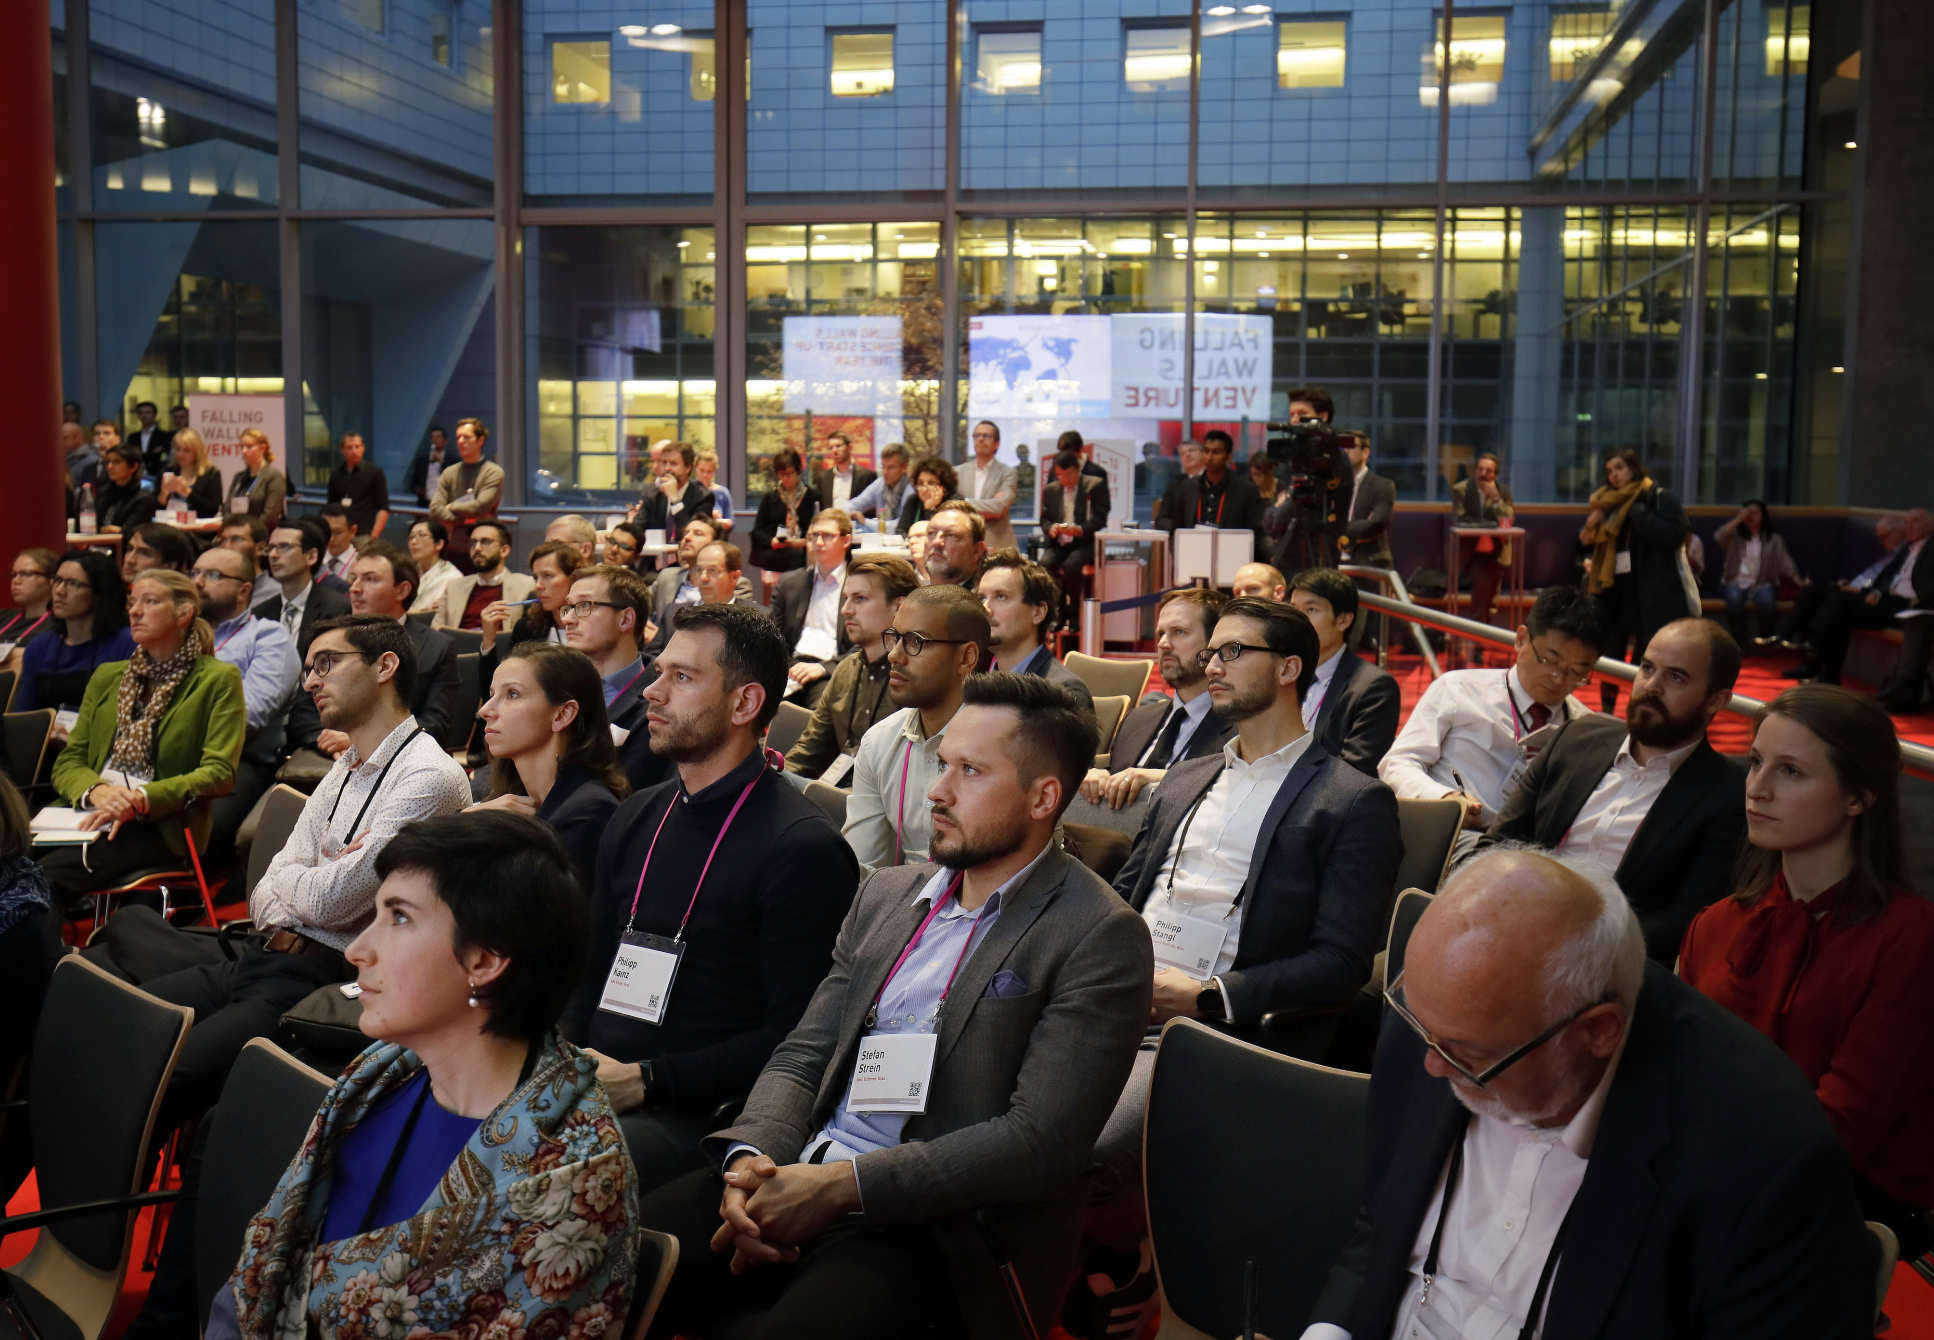 Falling Walls is attended by some of the world's leading scientists